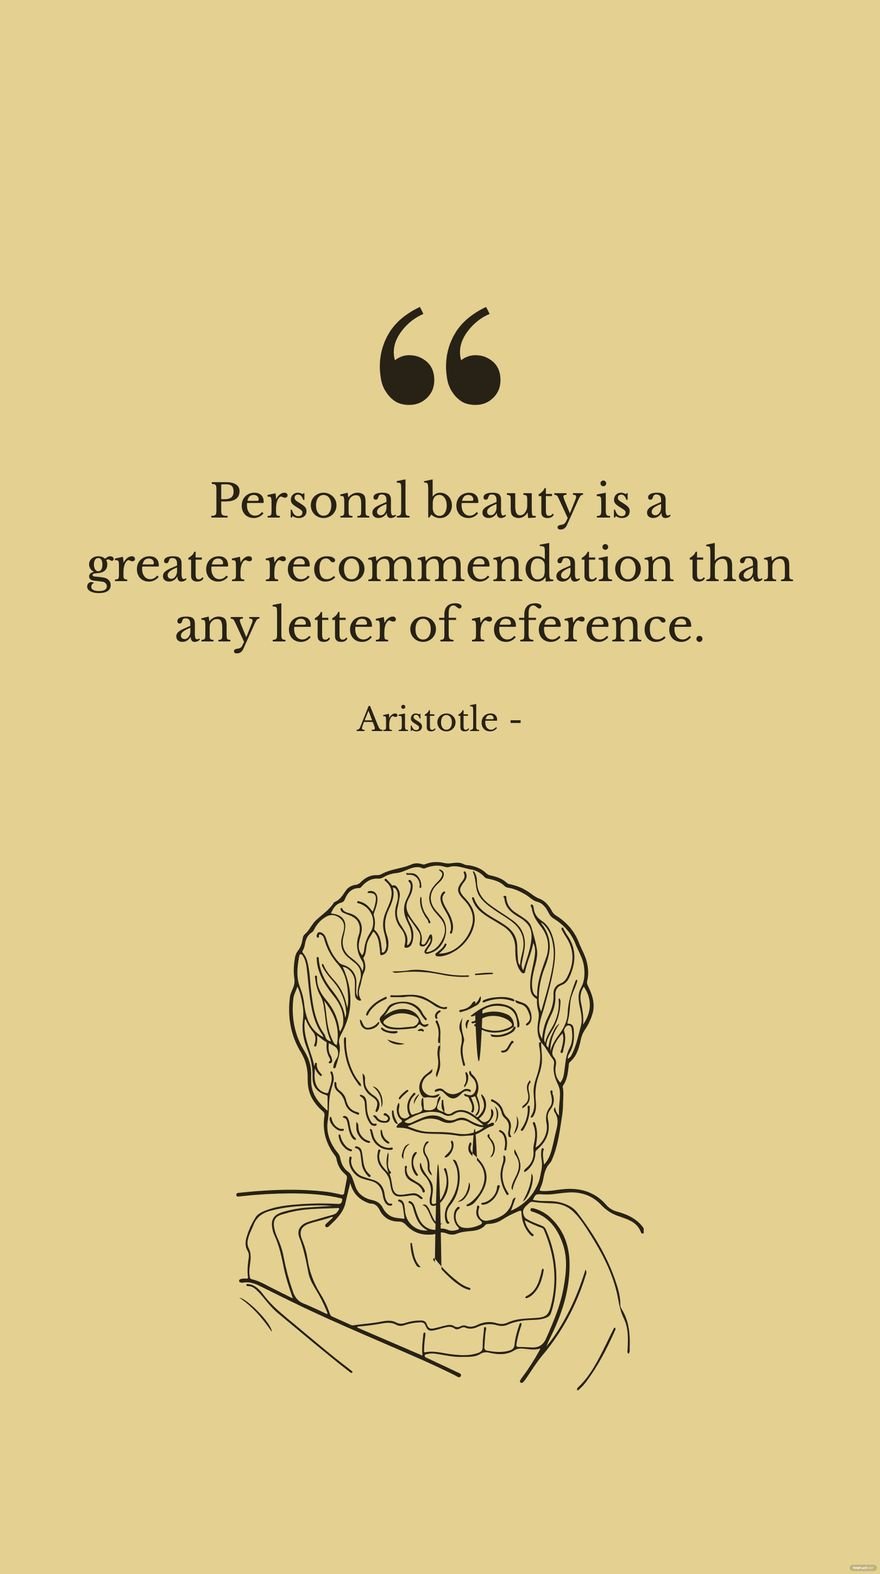 Aristotle - Personal beauty is a greater recommendation than any letter of reference. in JPG